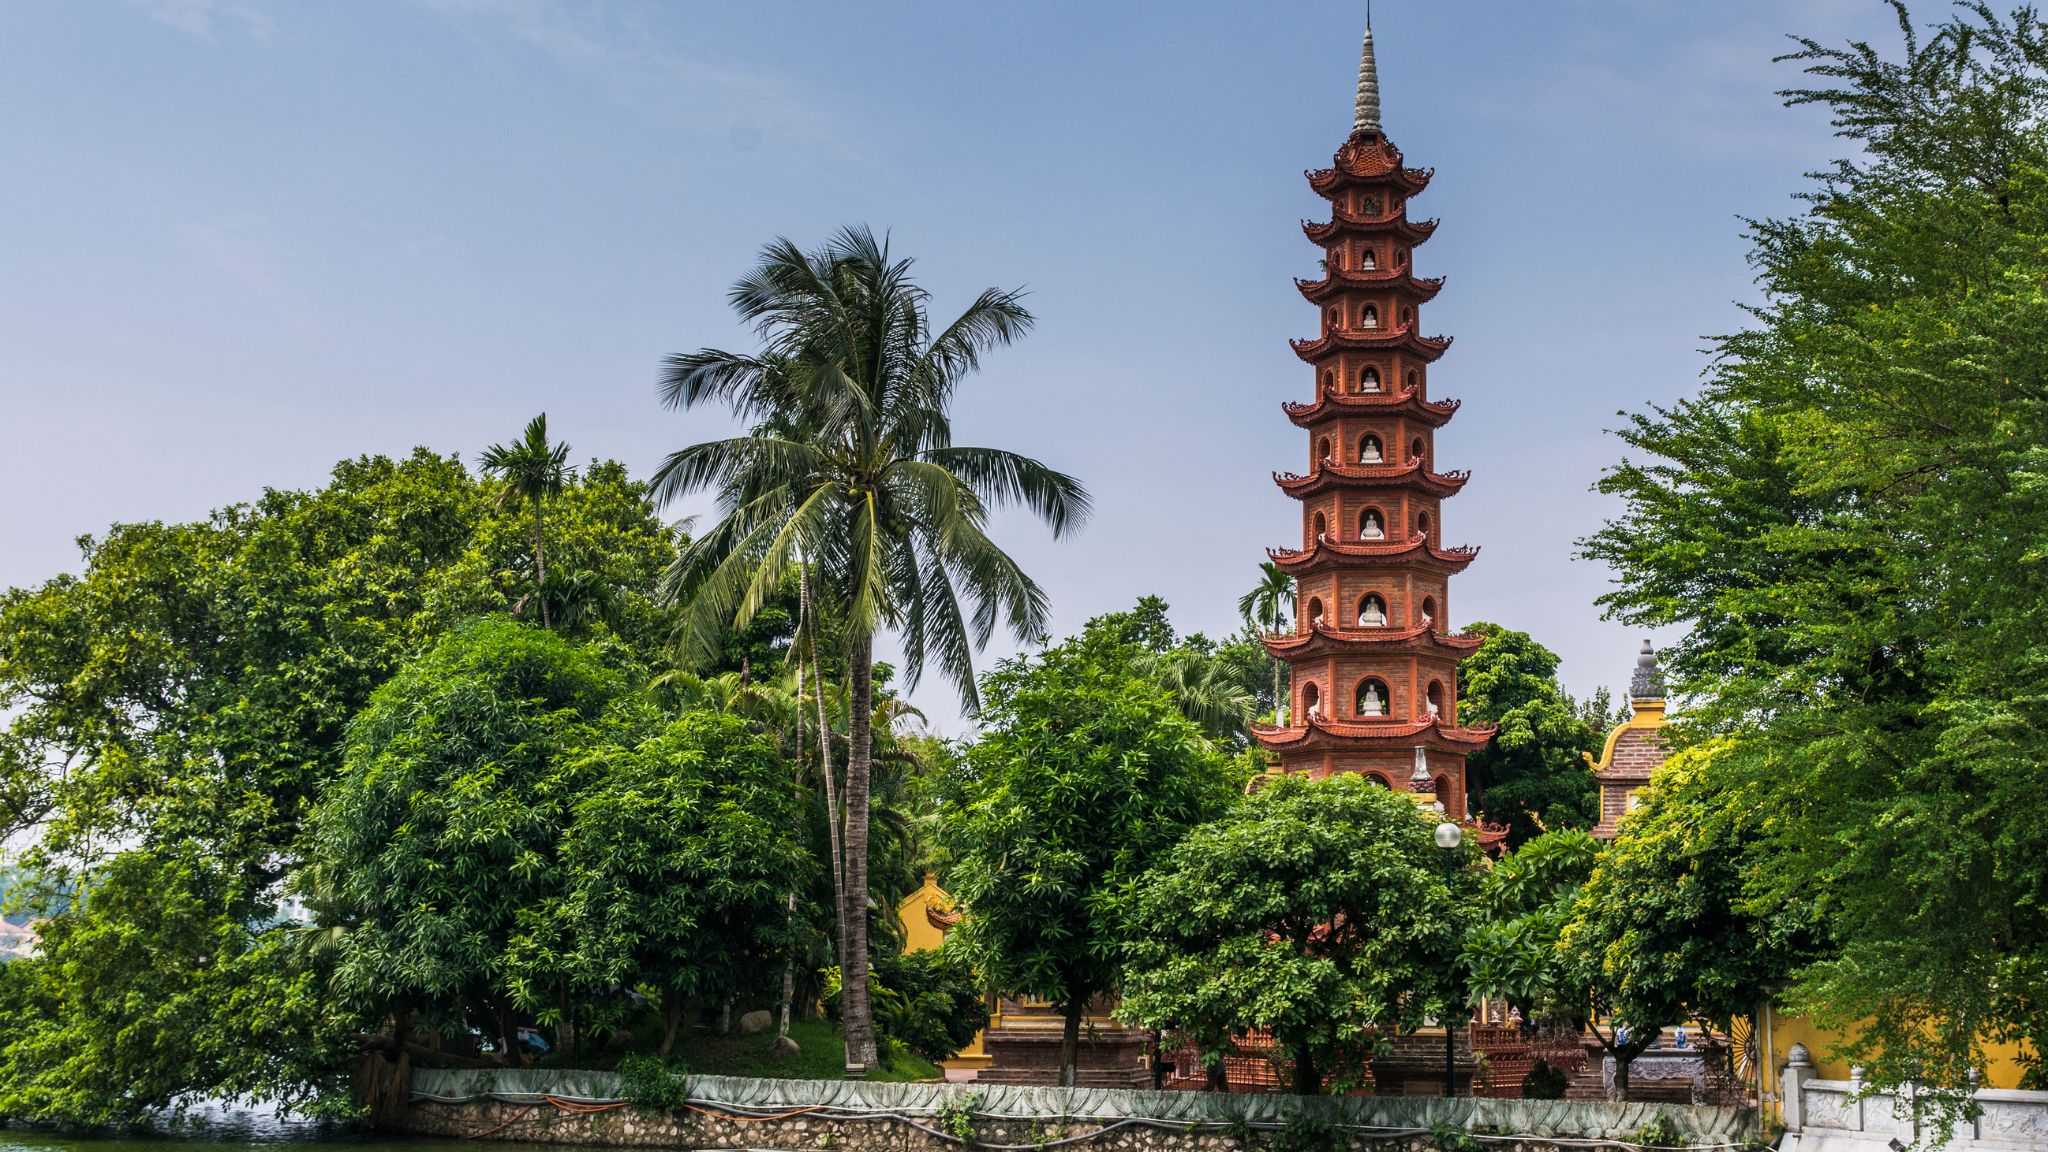 Day 2 The Vintage Beauty Of Tran Quoc Pagoda